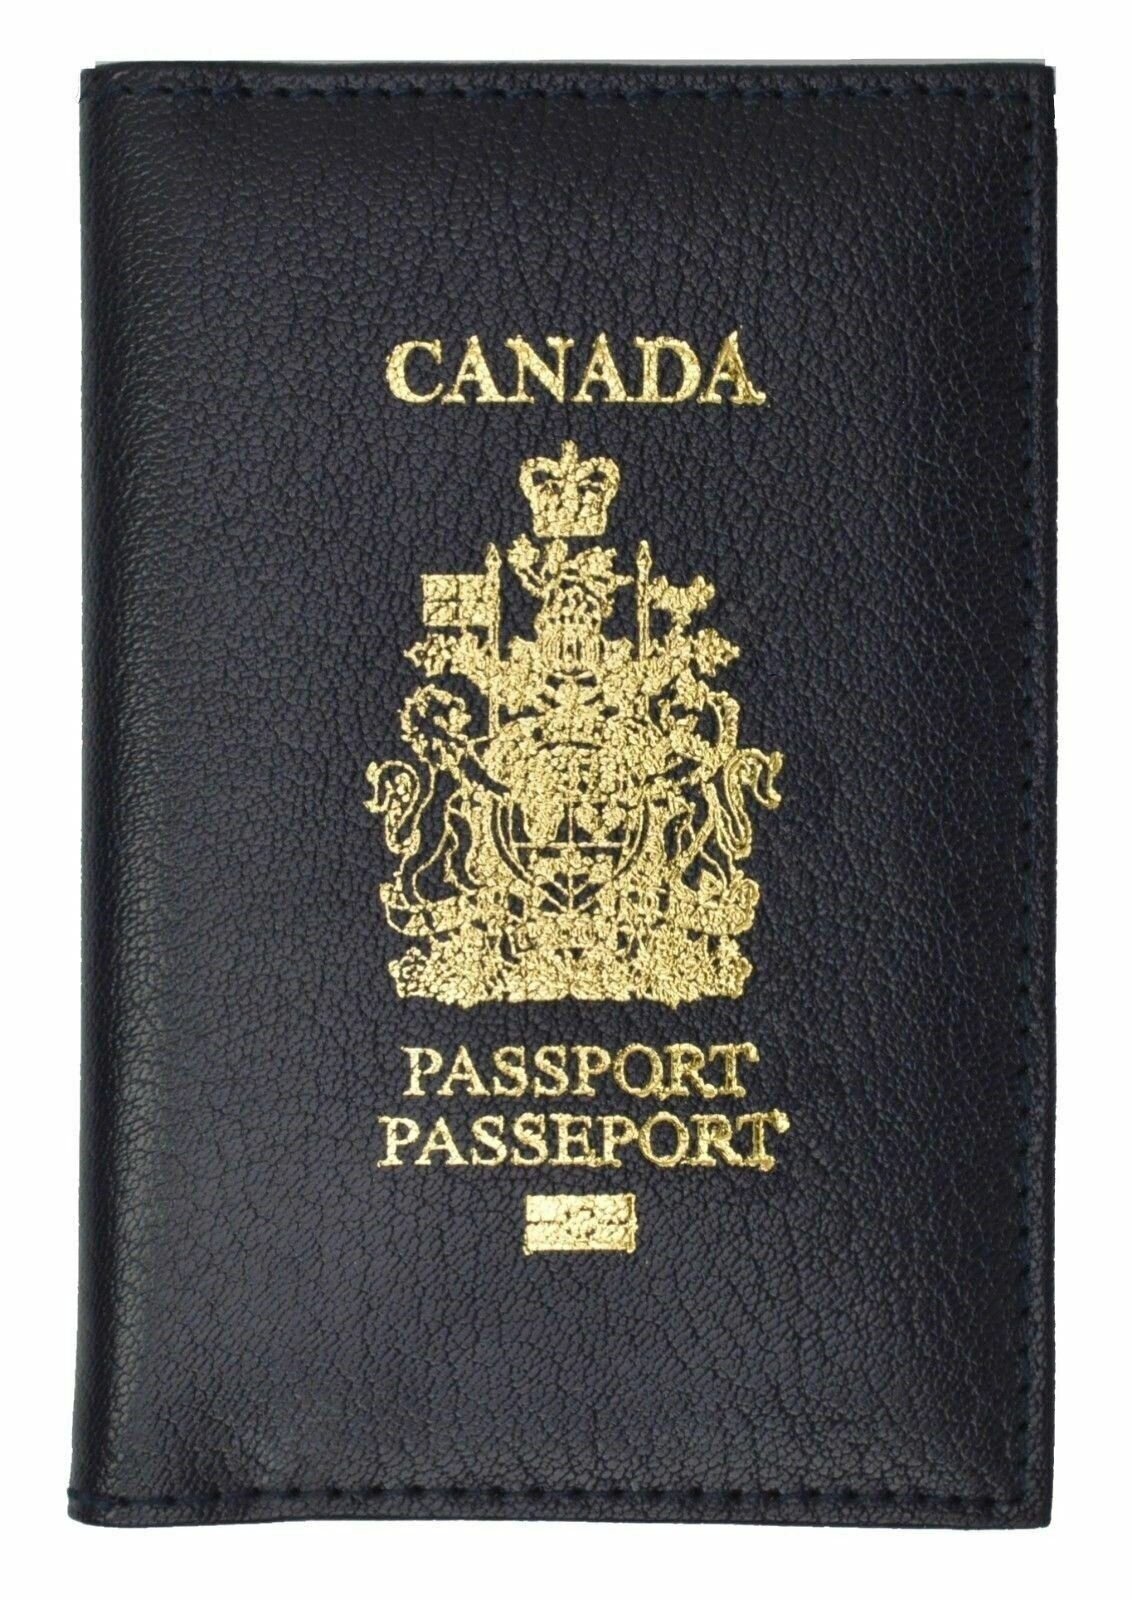 CANADA Travel Leather Passport Organizer Holder Card Case Protector Cover Wallet